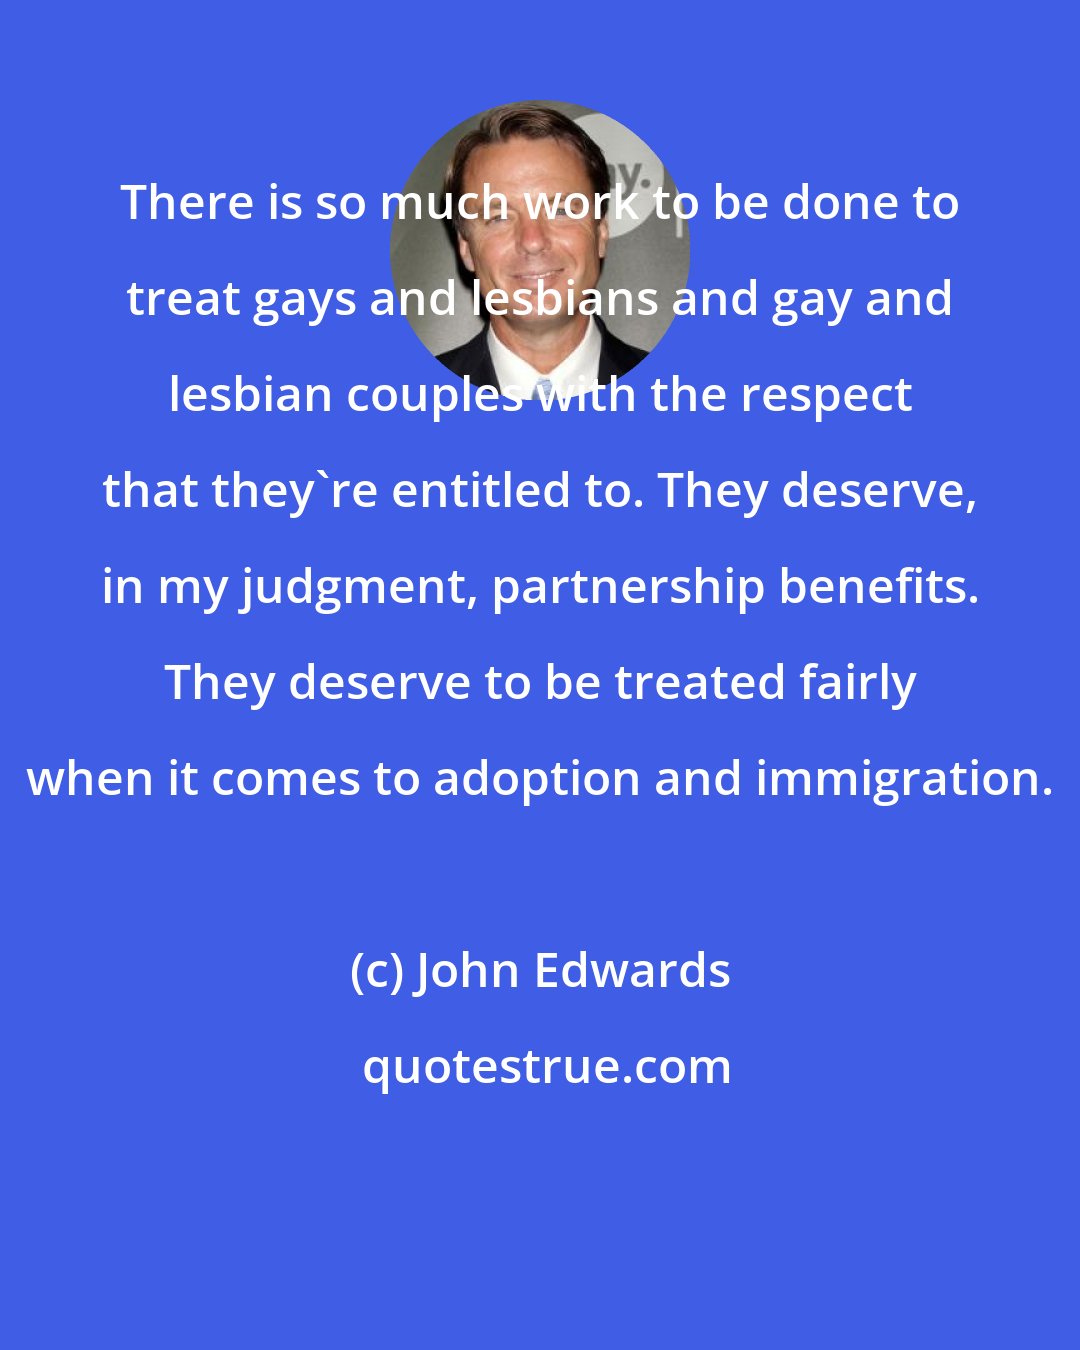 John Edwards: There is so much work to be done to treat gays and lesbians and gay and lesbian couples with the respect that they're entitled to. They deserve, in my judgment, partnership benefits. They deserve to be treated fairly when it comes to adoption and immigration.